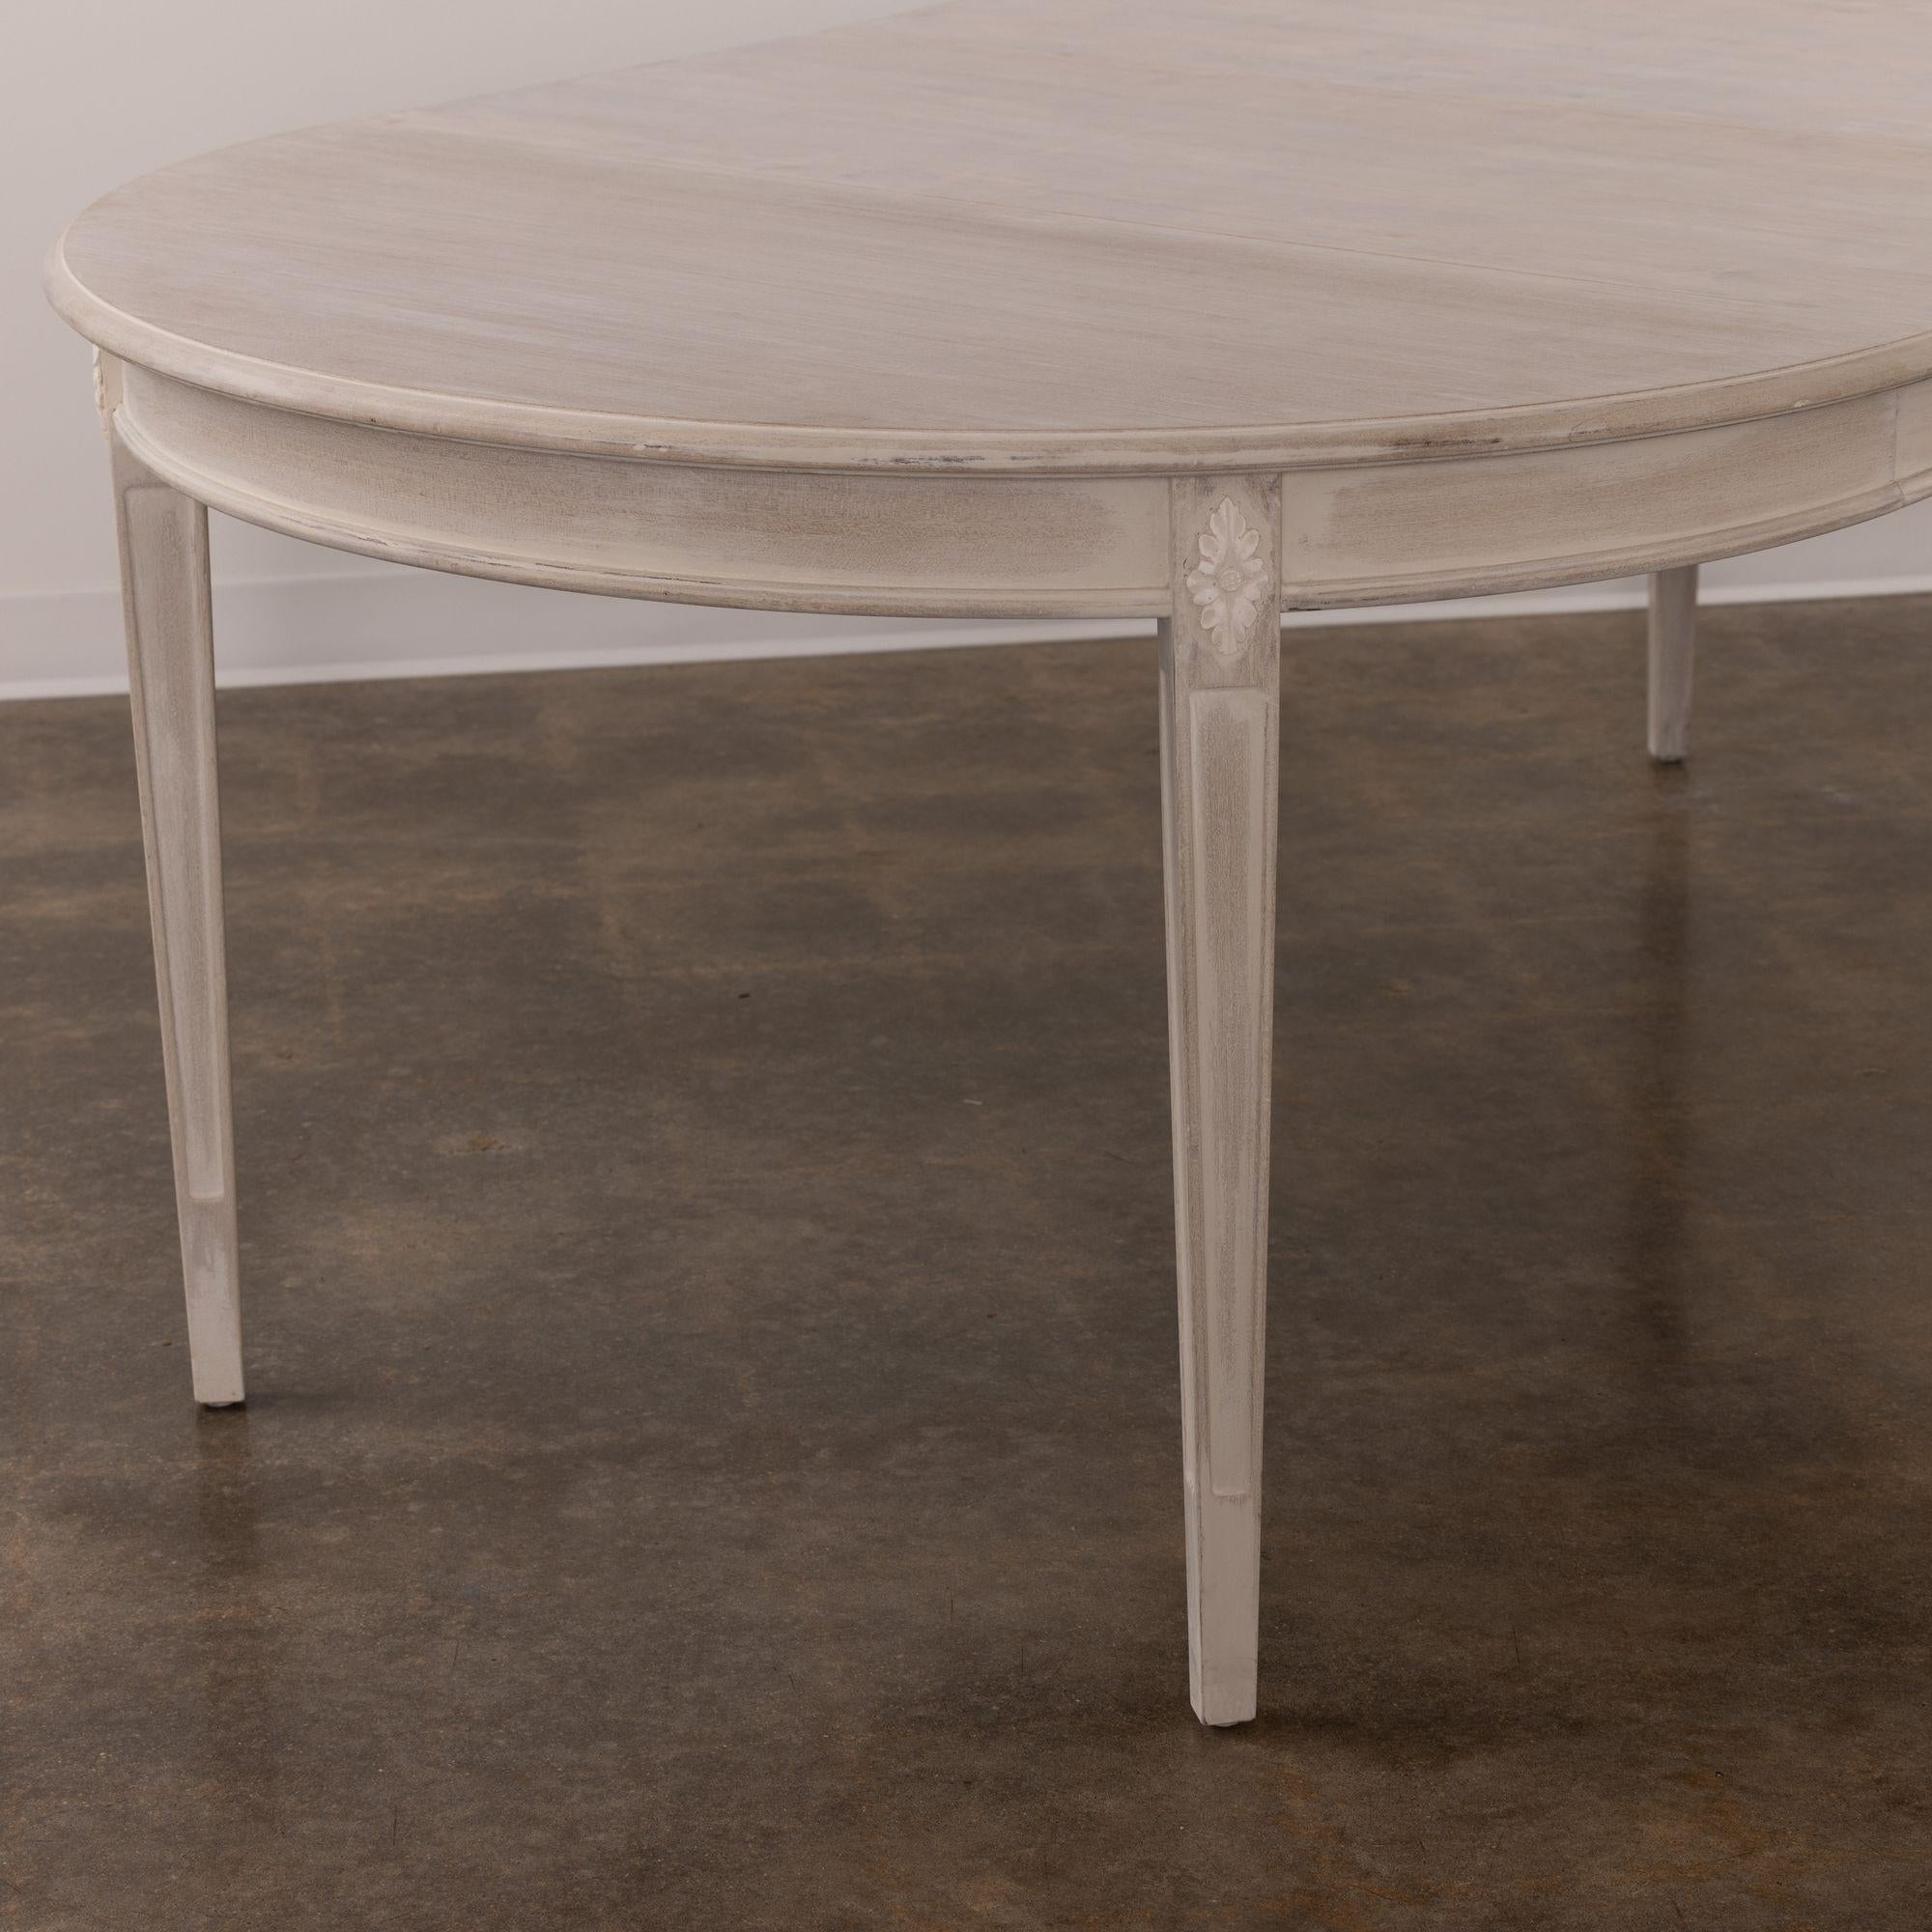 20th Century 19th c. Swedish Gustavian Bleached and Glazed Extension Table with Three Leaves For Sale